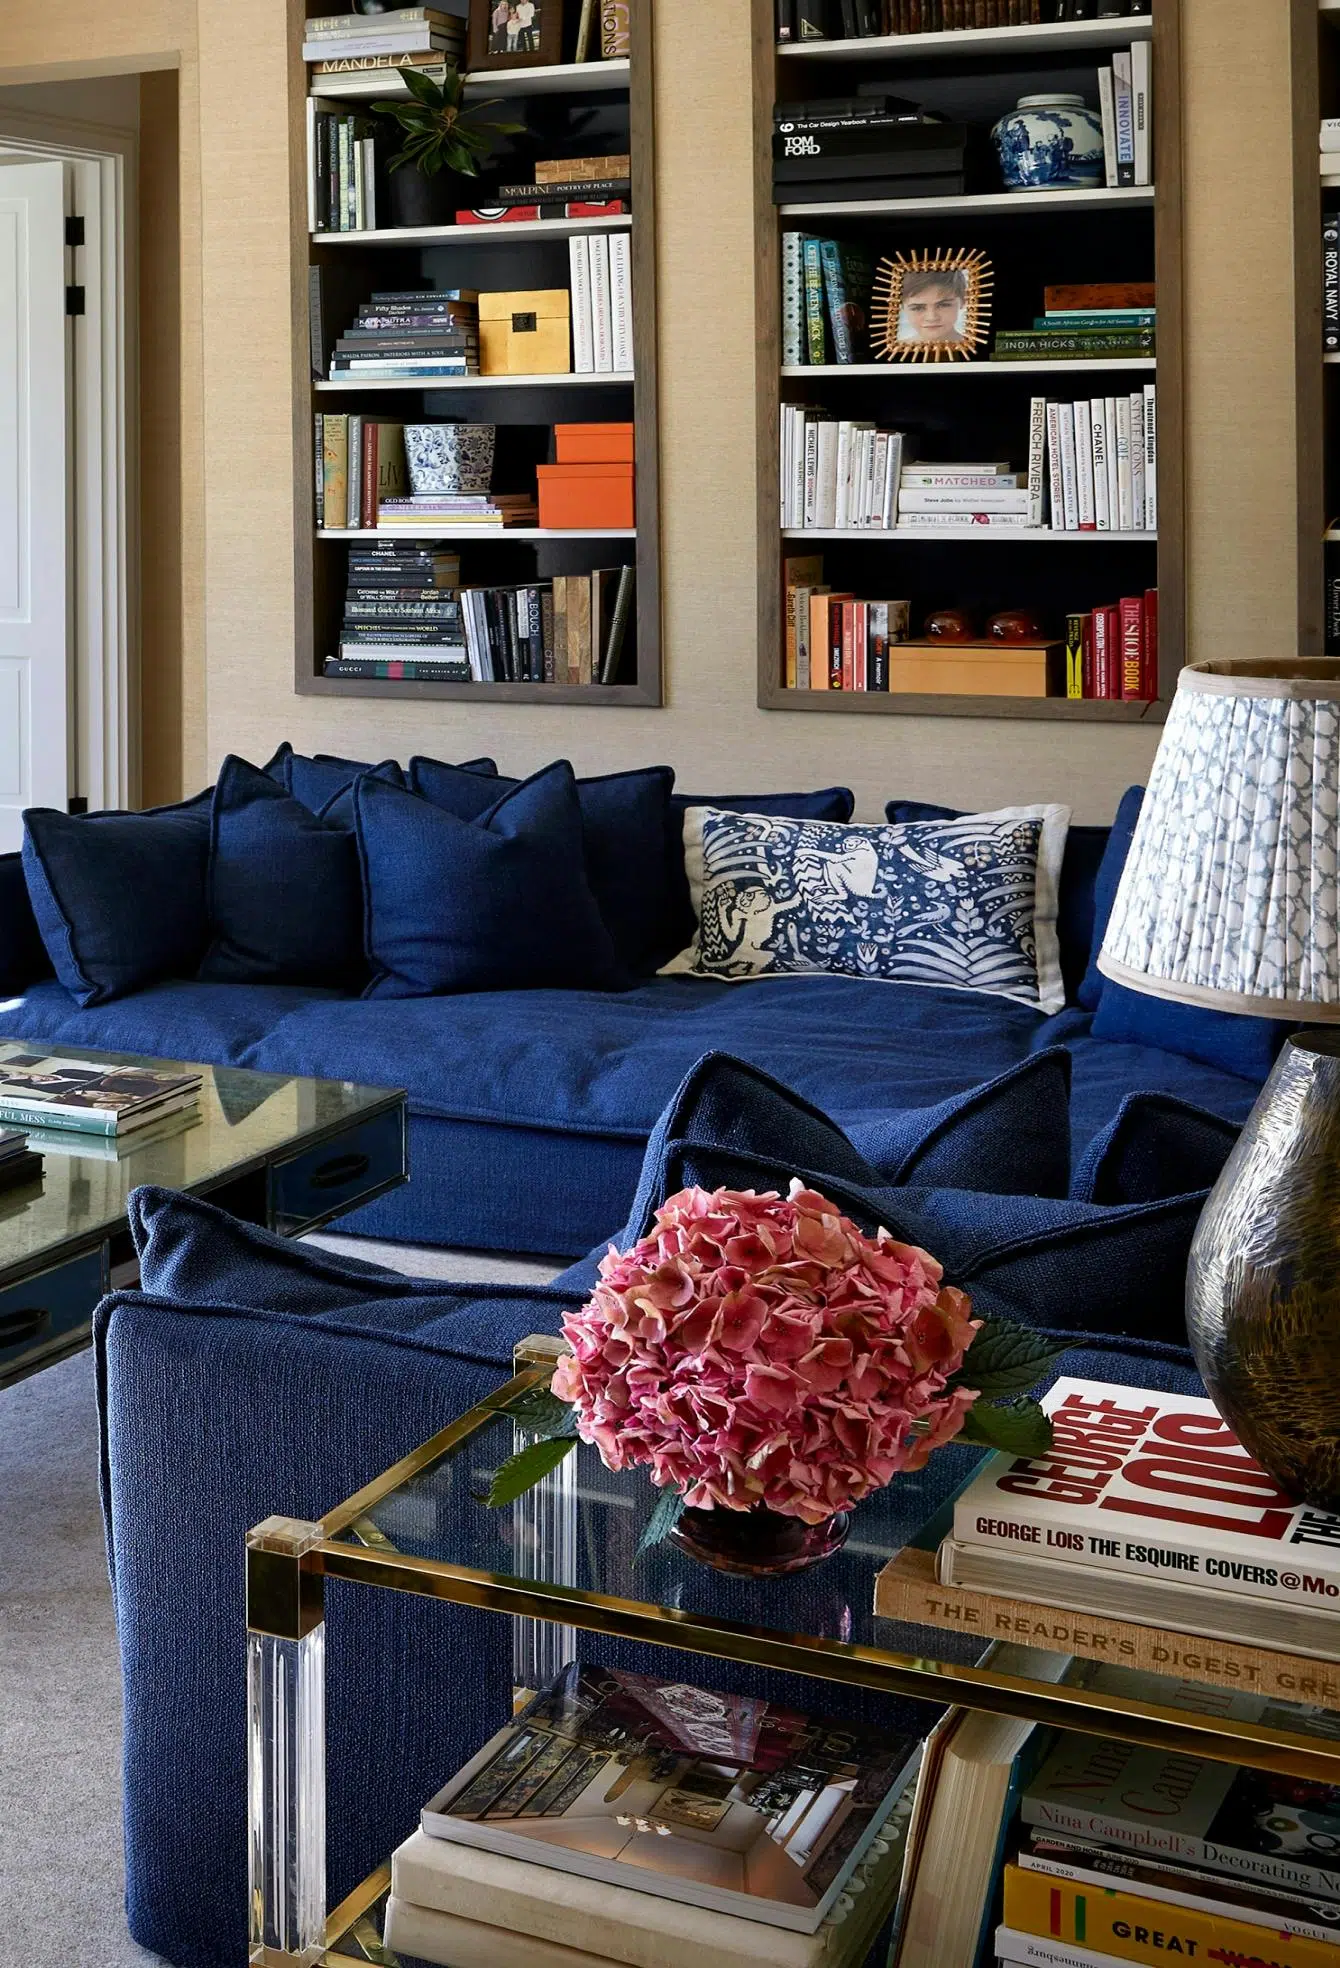 Close-up of a room that features a deep blue sofa, book and other decorative accents on the wall in the background.